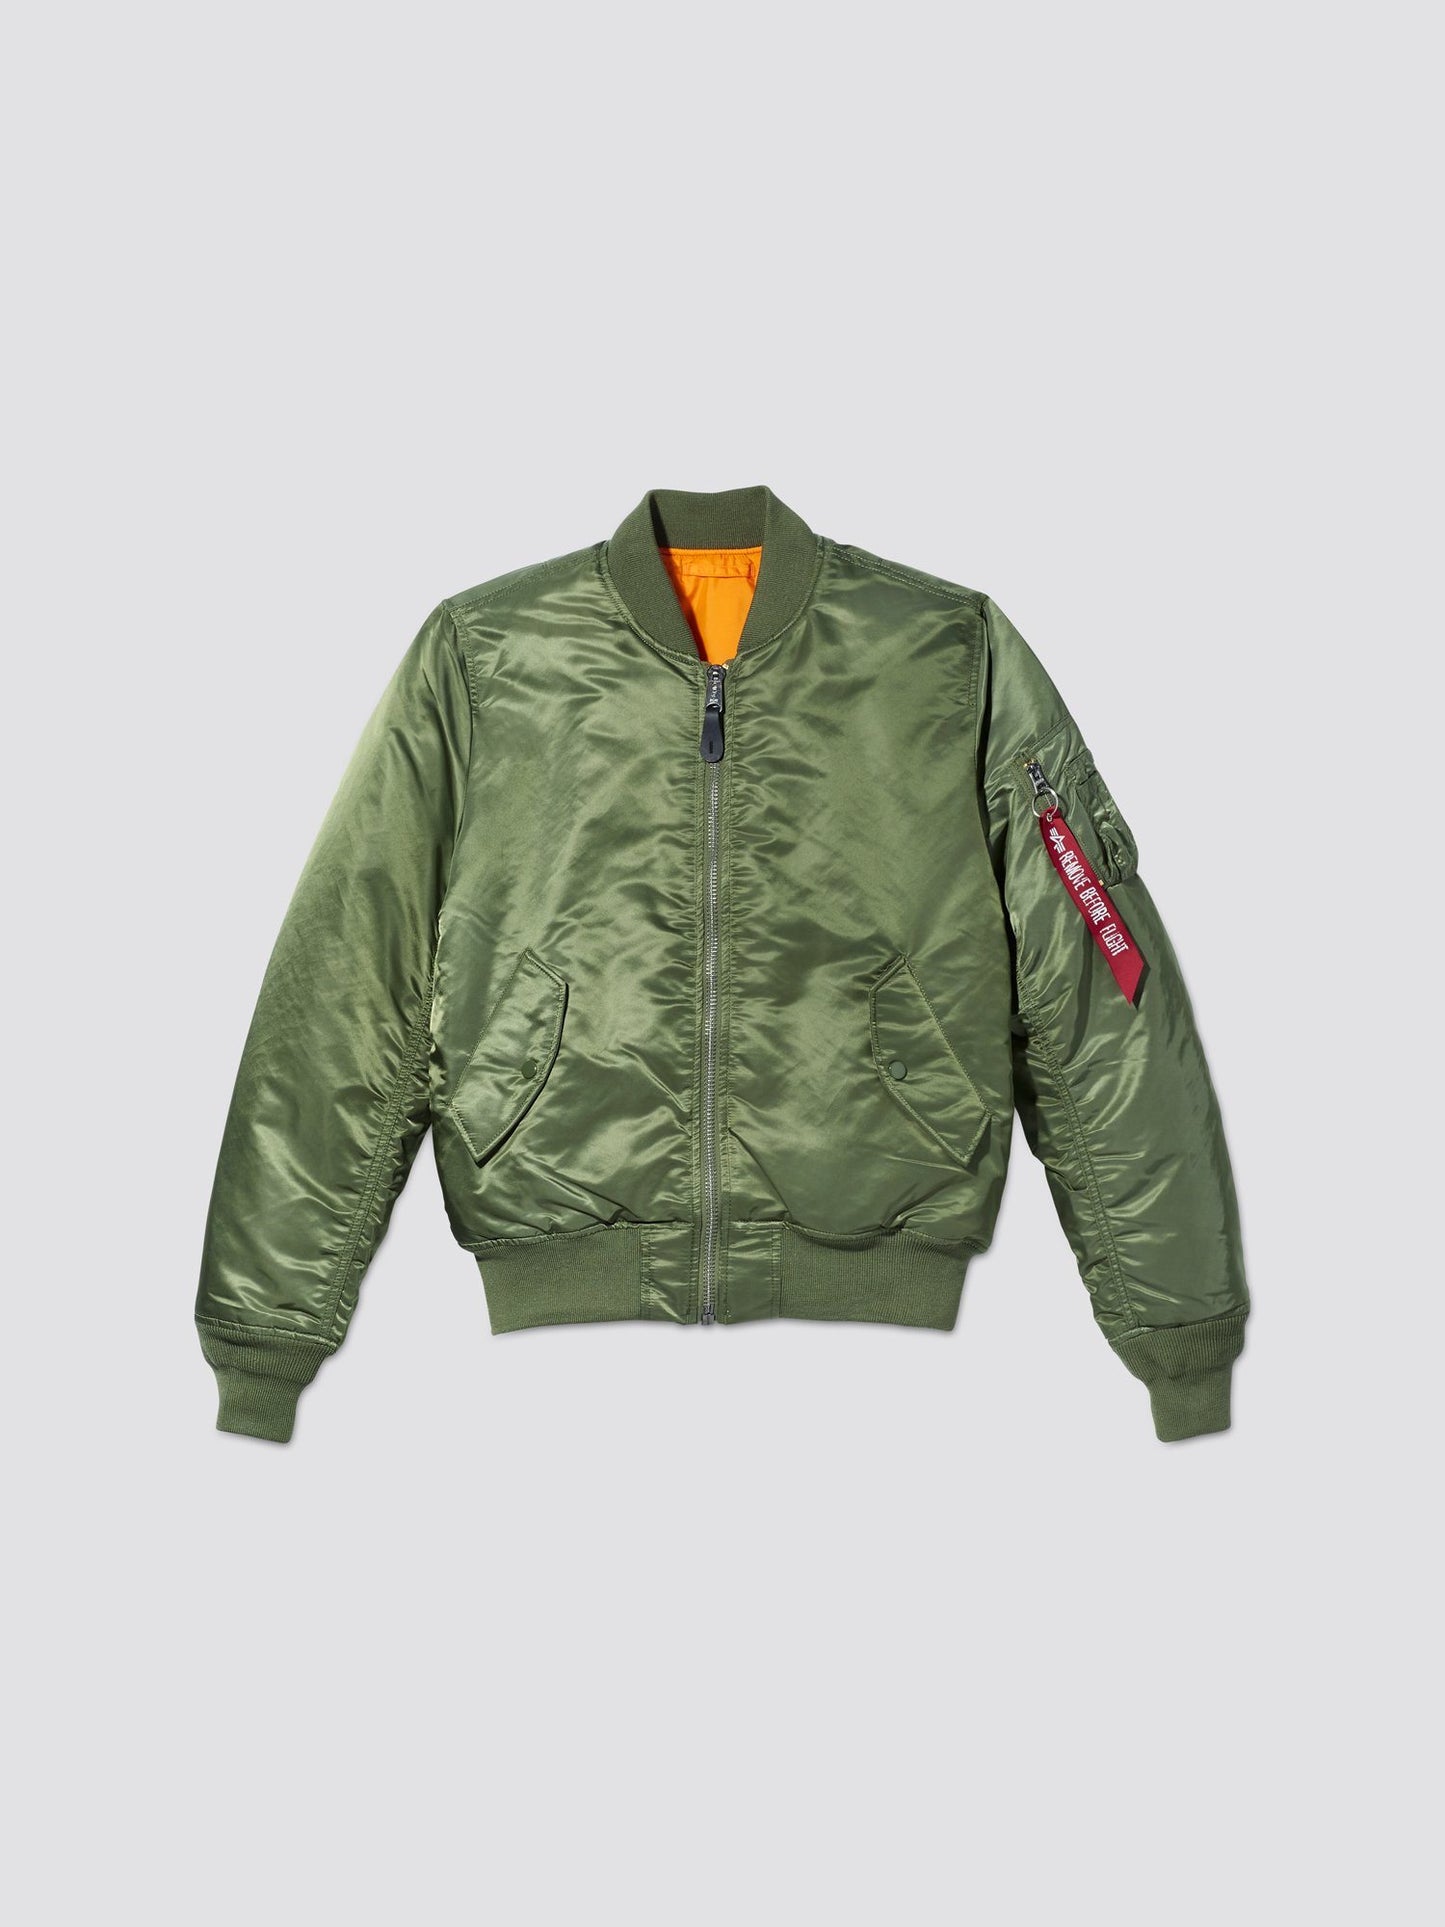 MA-1 BOMBER JACKET SLIM FIT OUTERWEAR Alpha Industries 